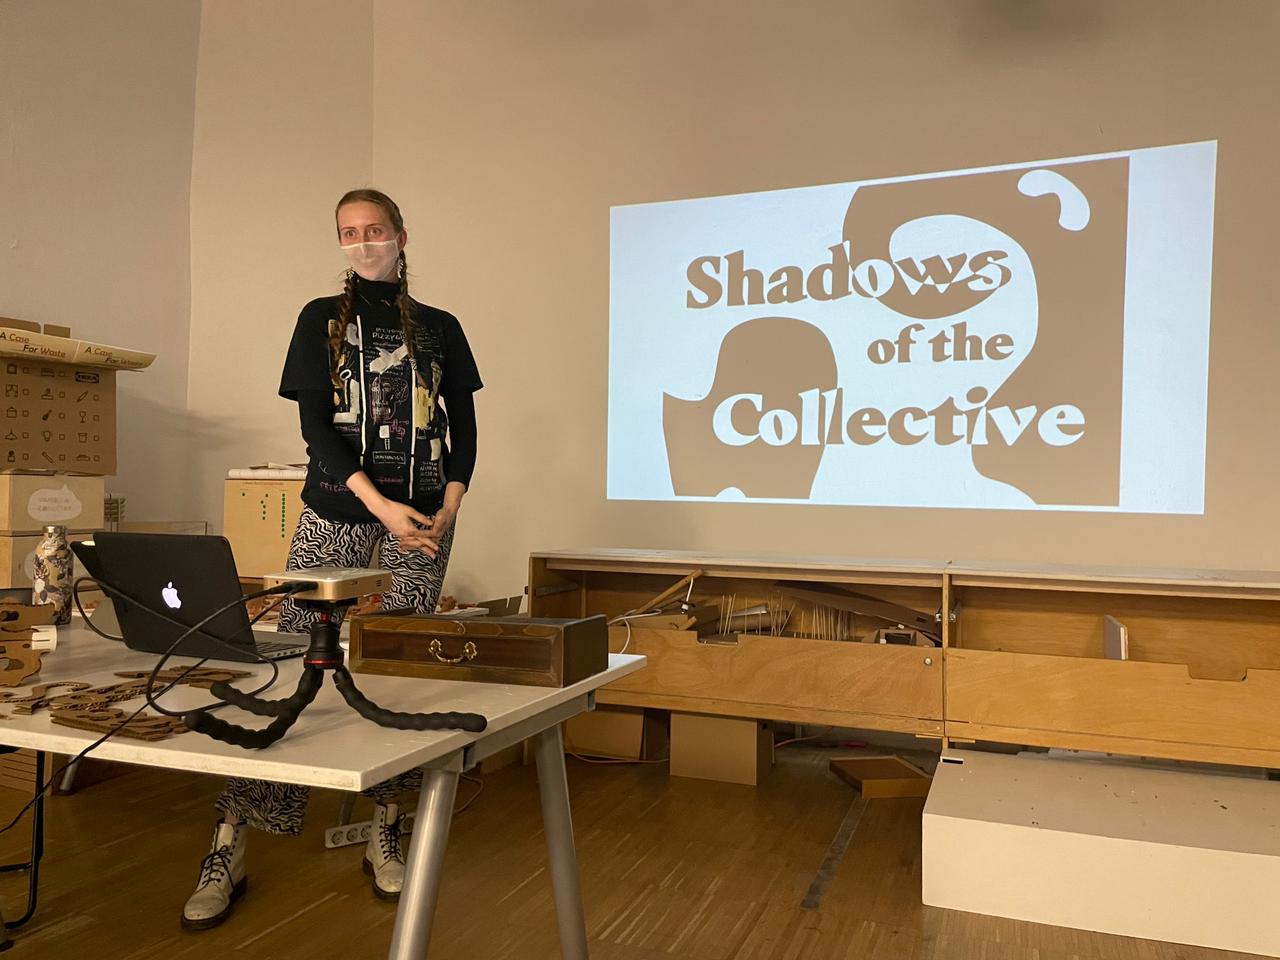 Shadows of the collective